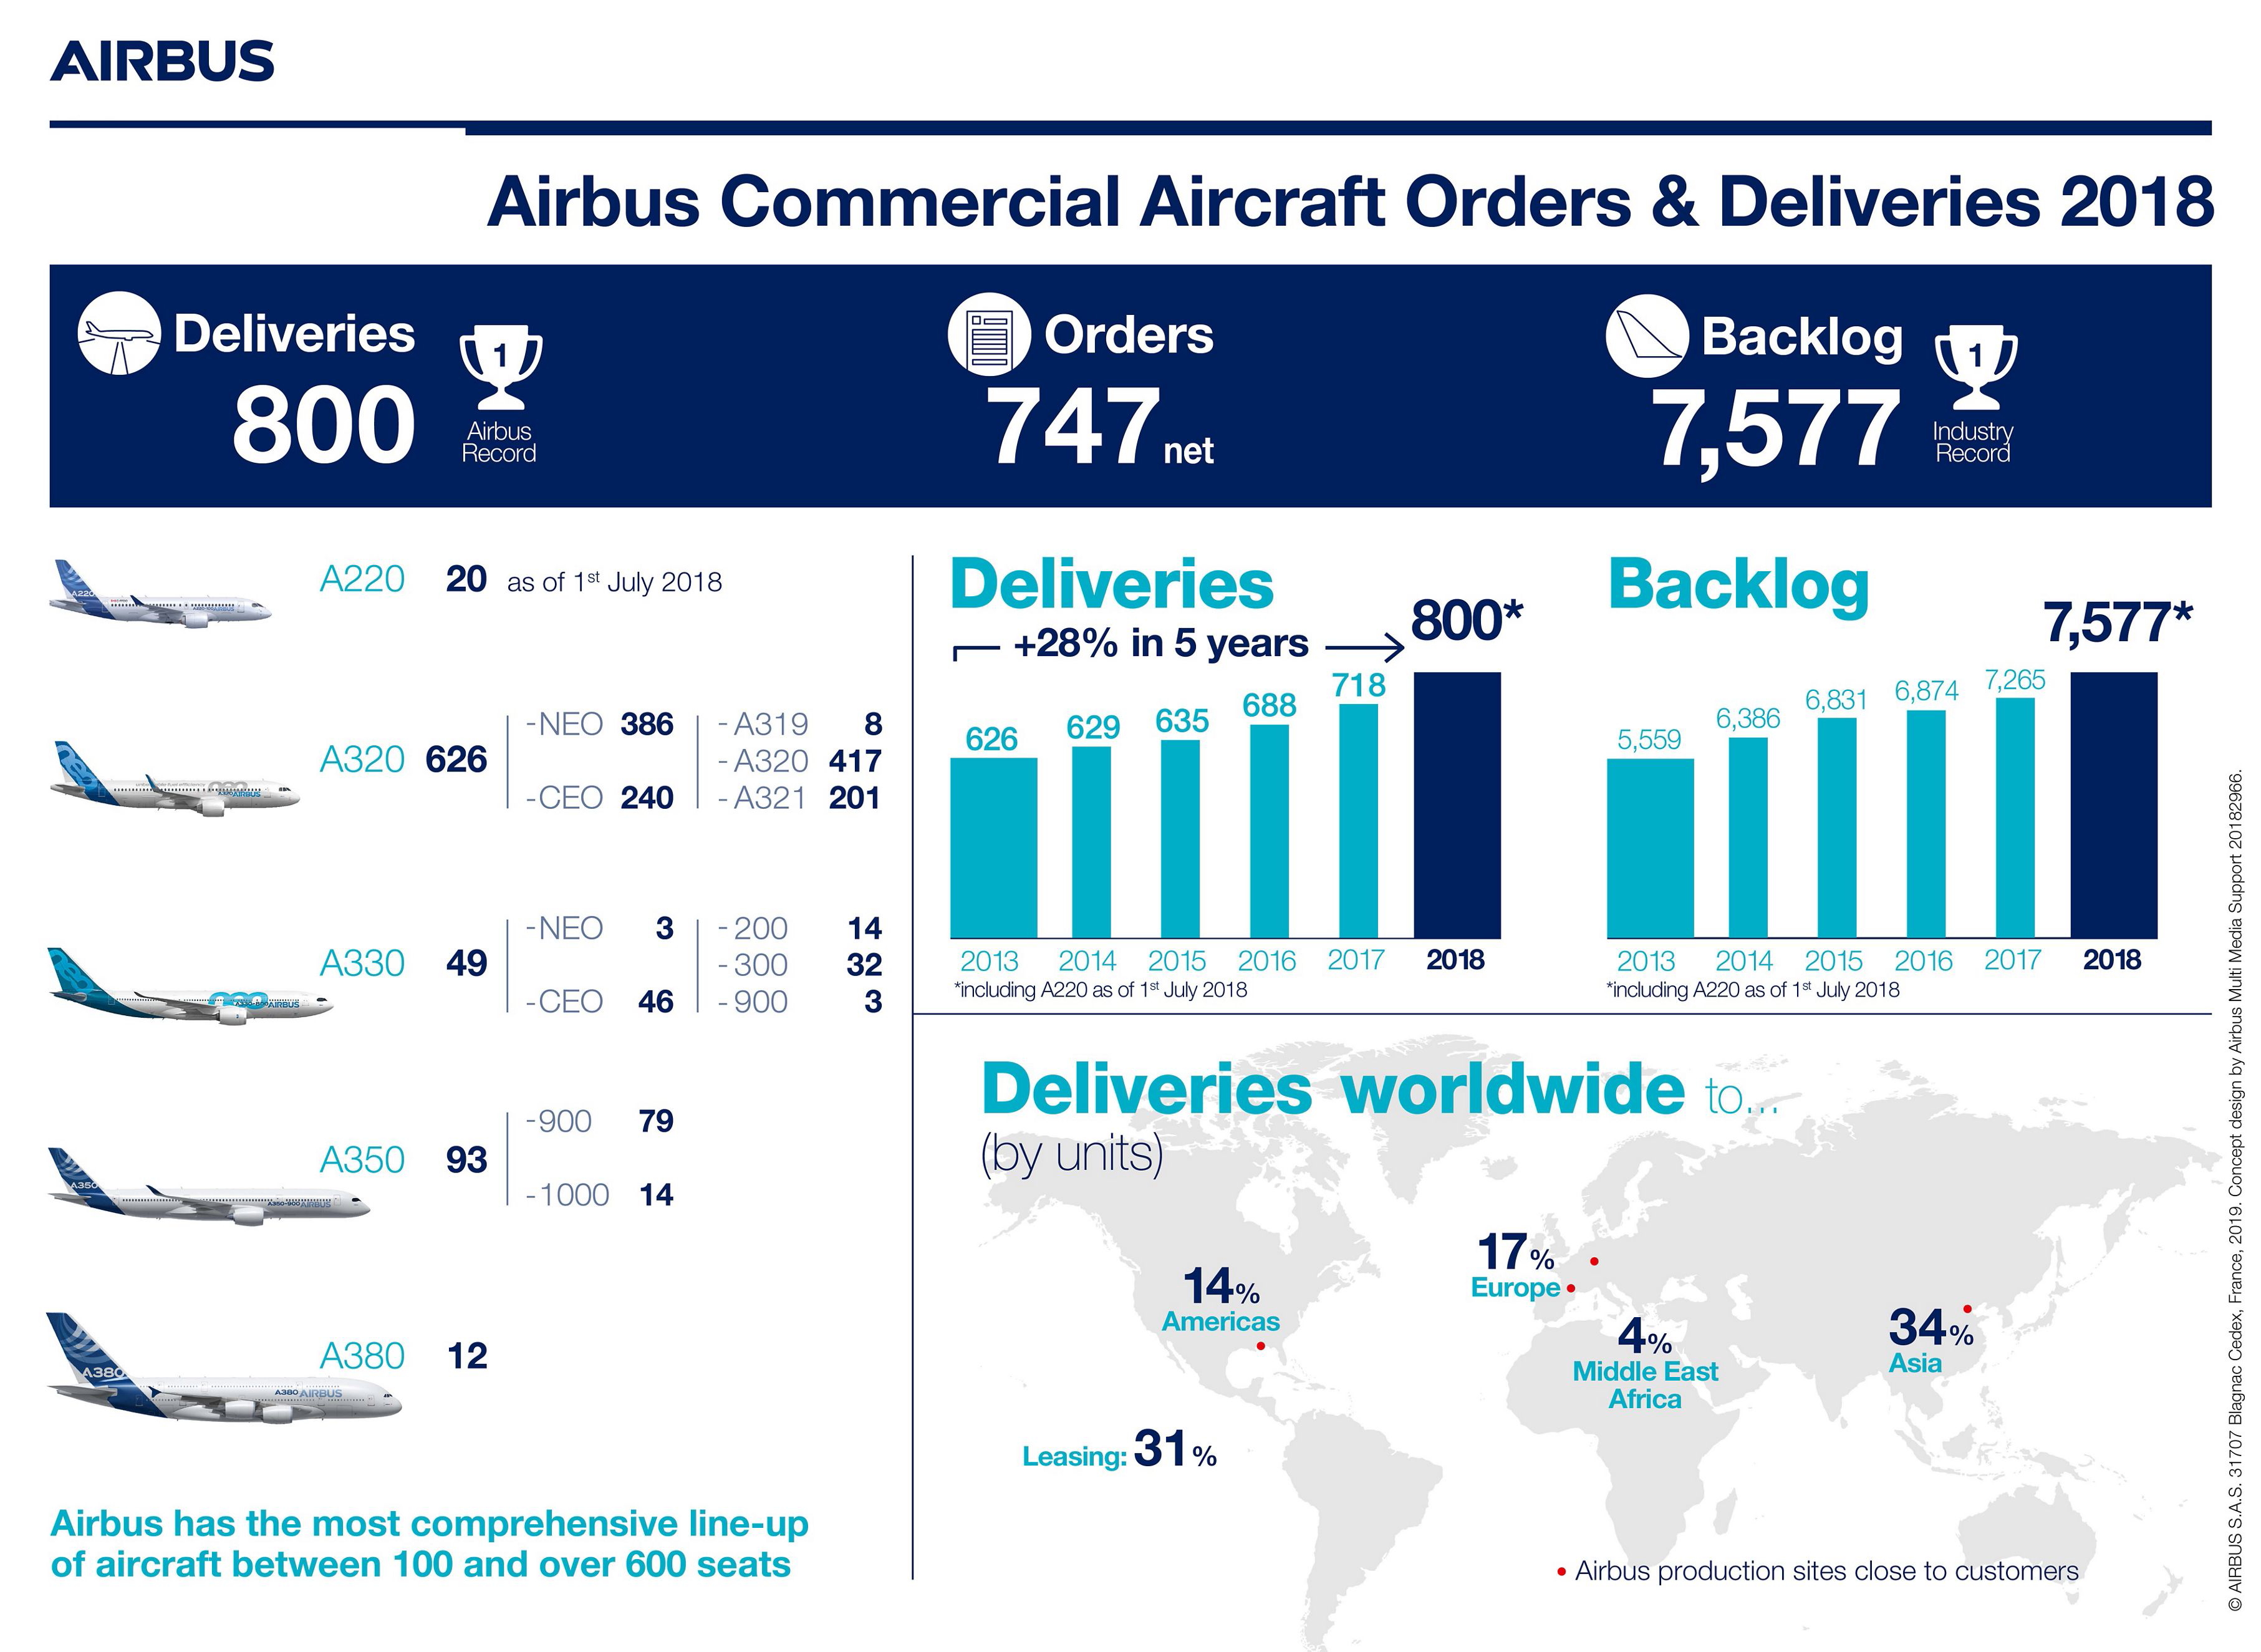 Airbus delivered 800 commercial aircraft to 93 customers in 2018, meeting its full year delivery guidance and setting a new company record. Deliveries were 11% higher than the previous record of 718 units, set in 2017. It is the 16th year in a row that Airbus has increased the number of commercial aircraft deliveries. Click to enlarge.